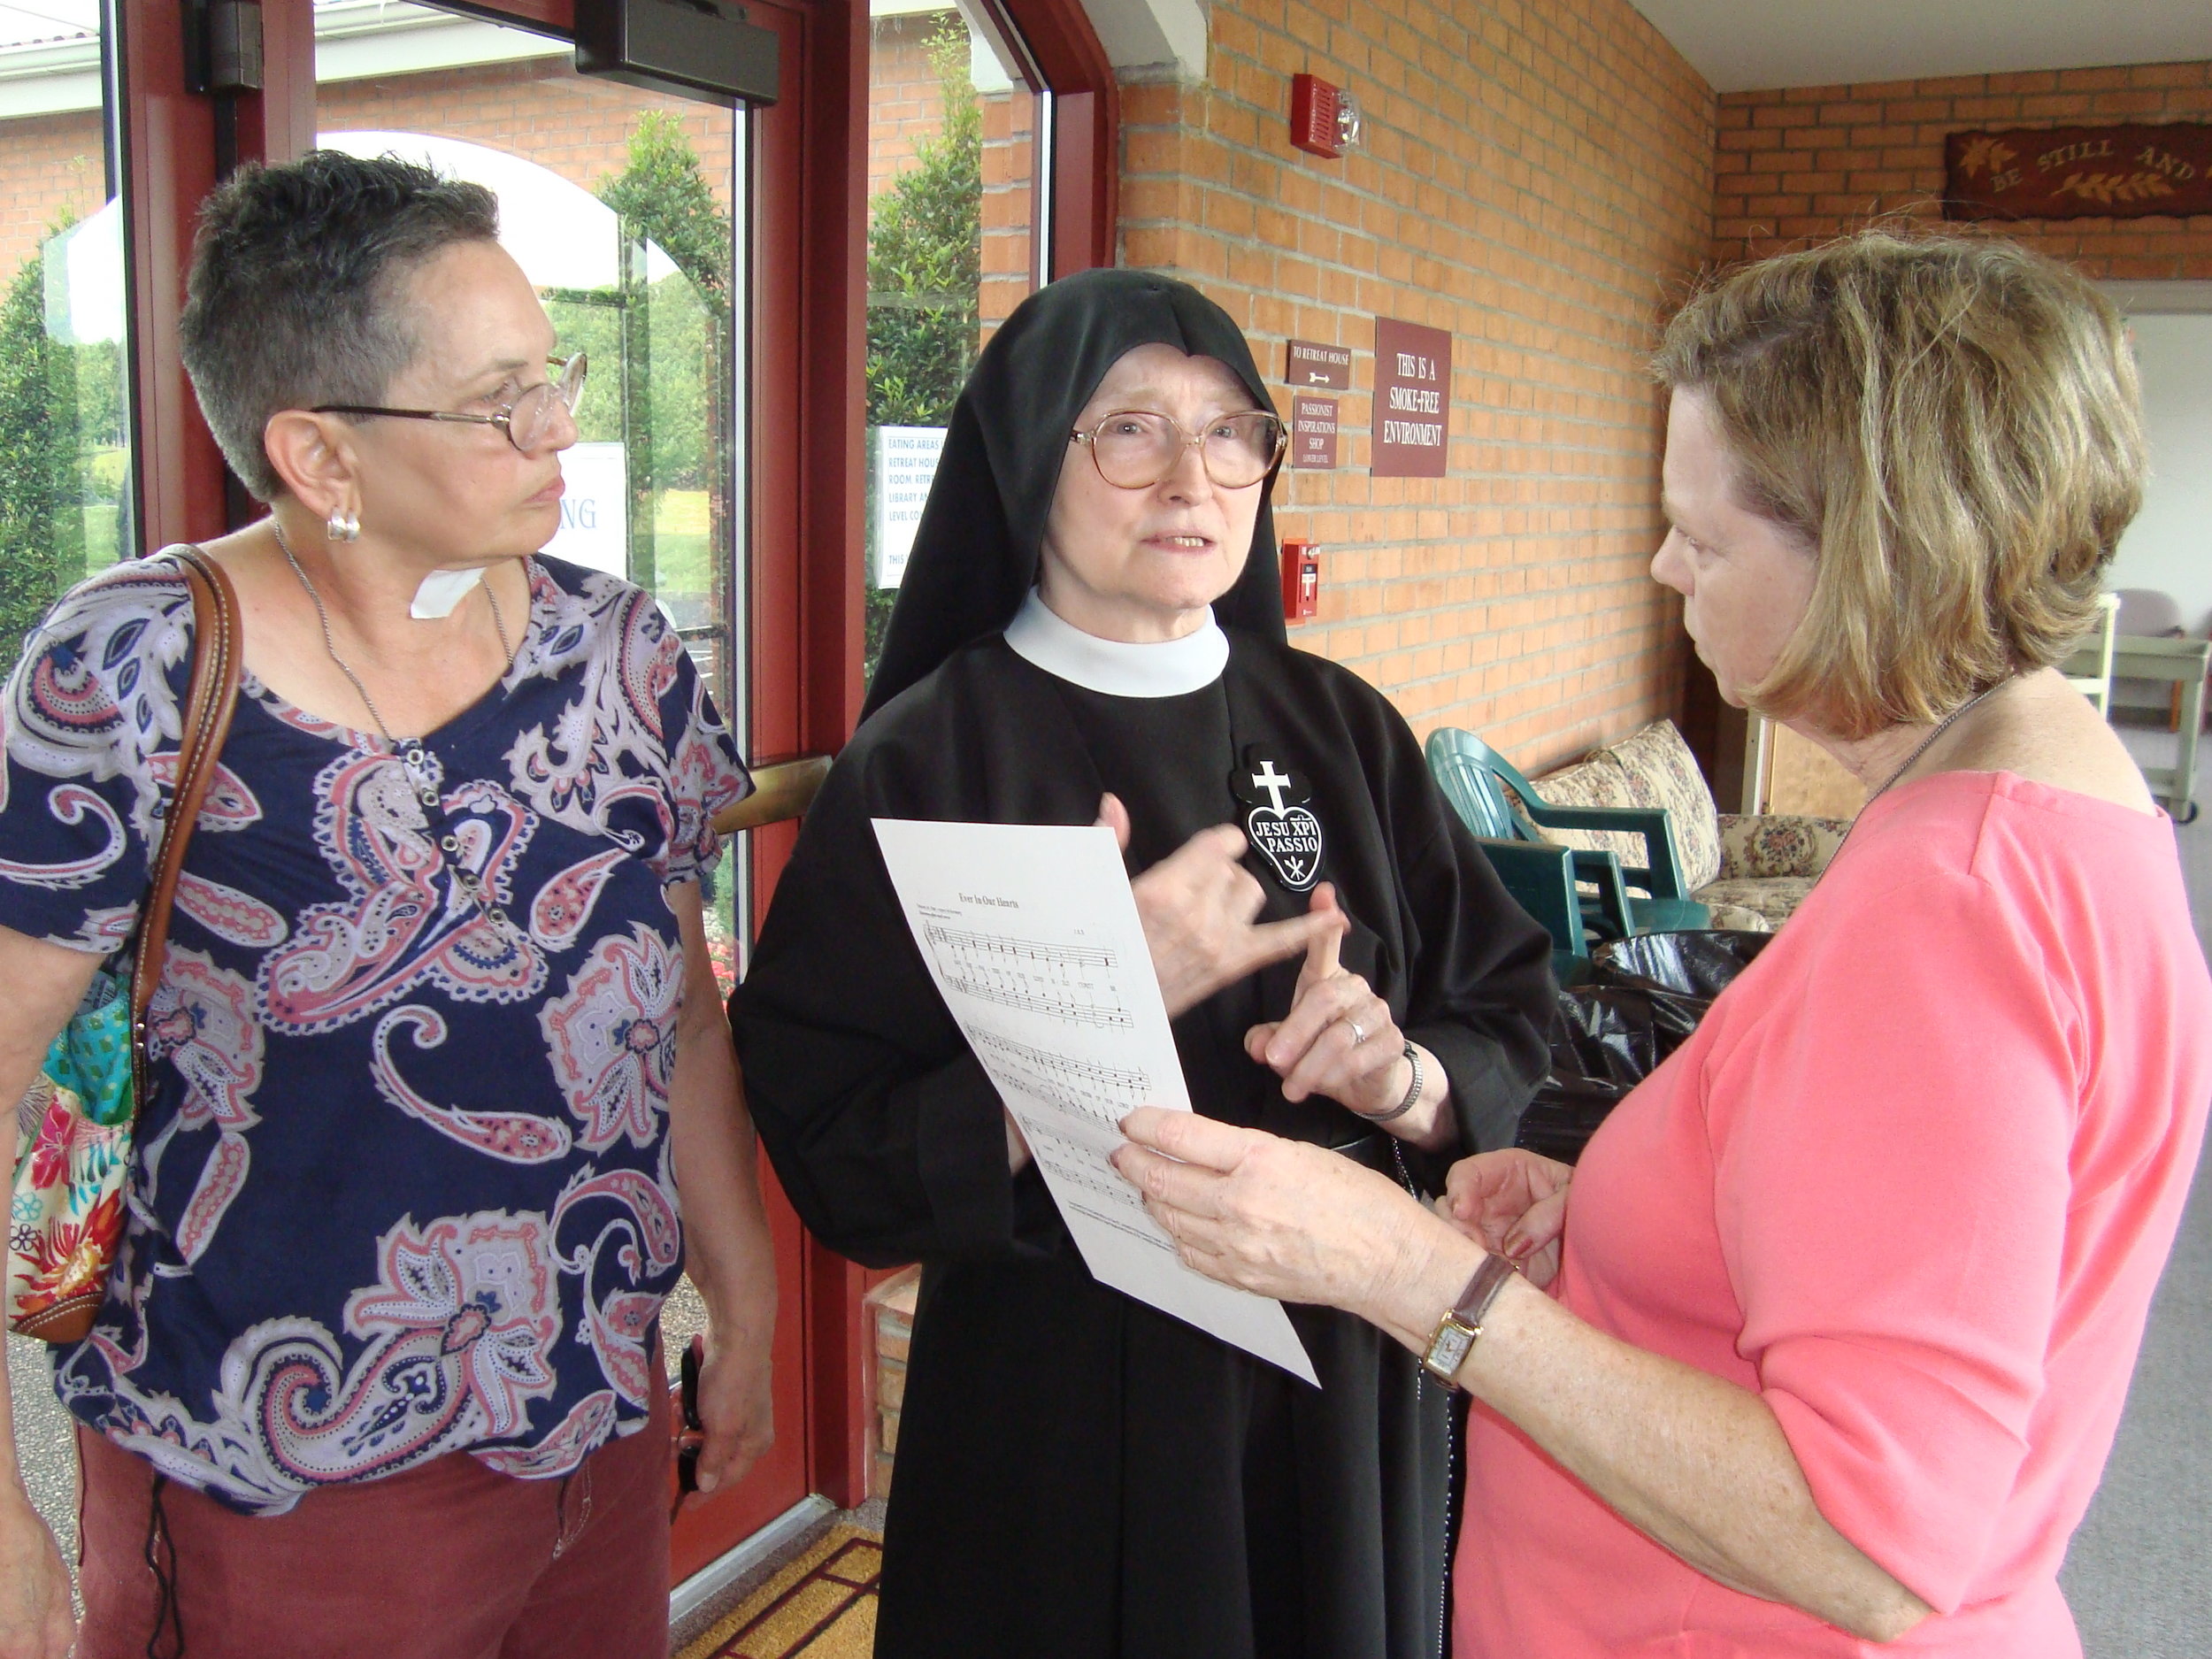 Sharing life with the Passionist Nuns of St. Joseph Monastery